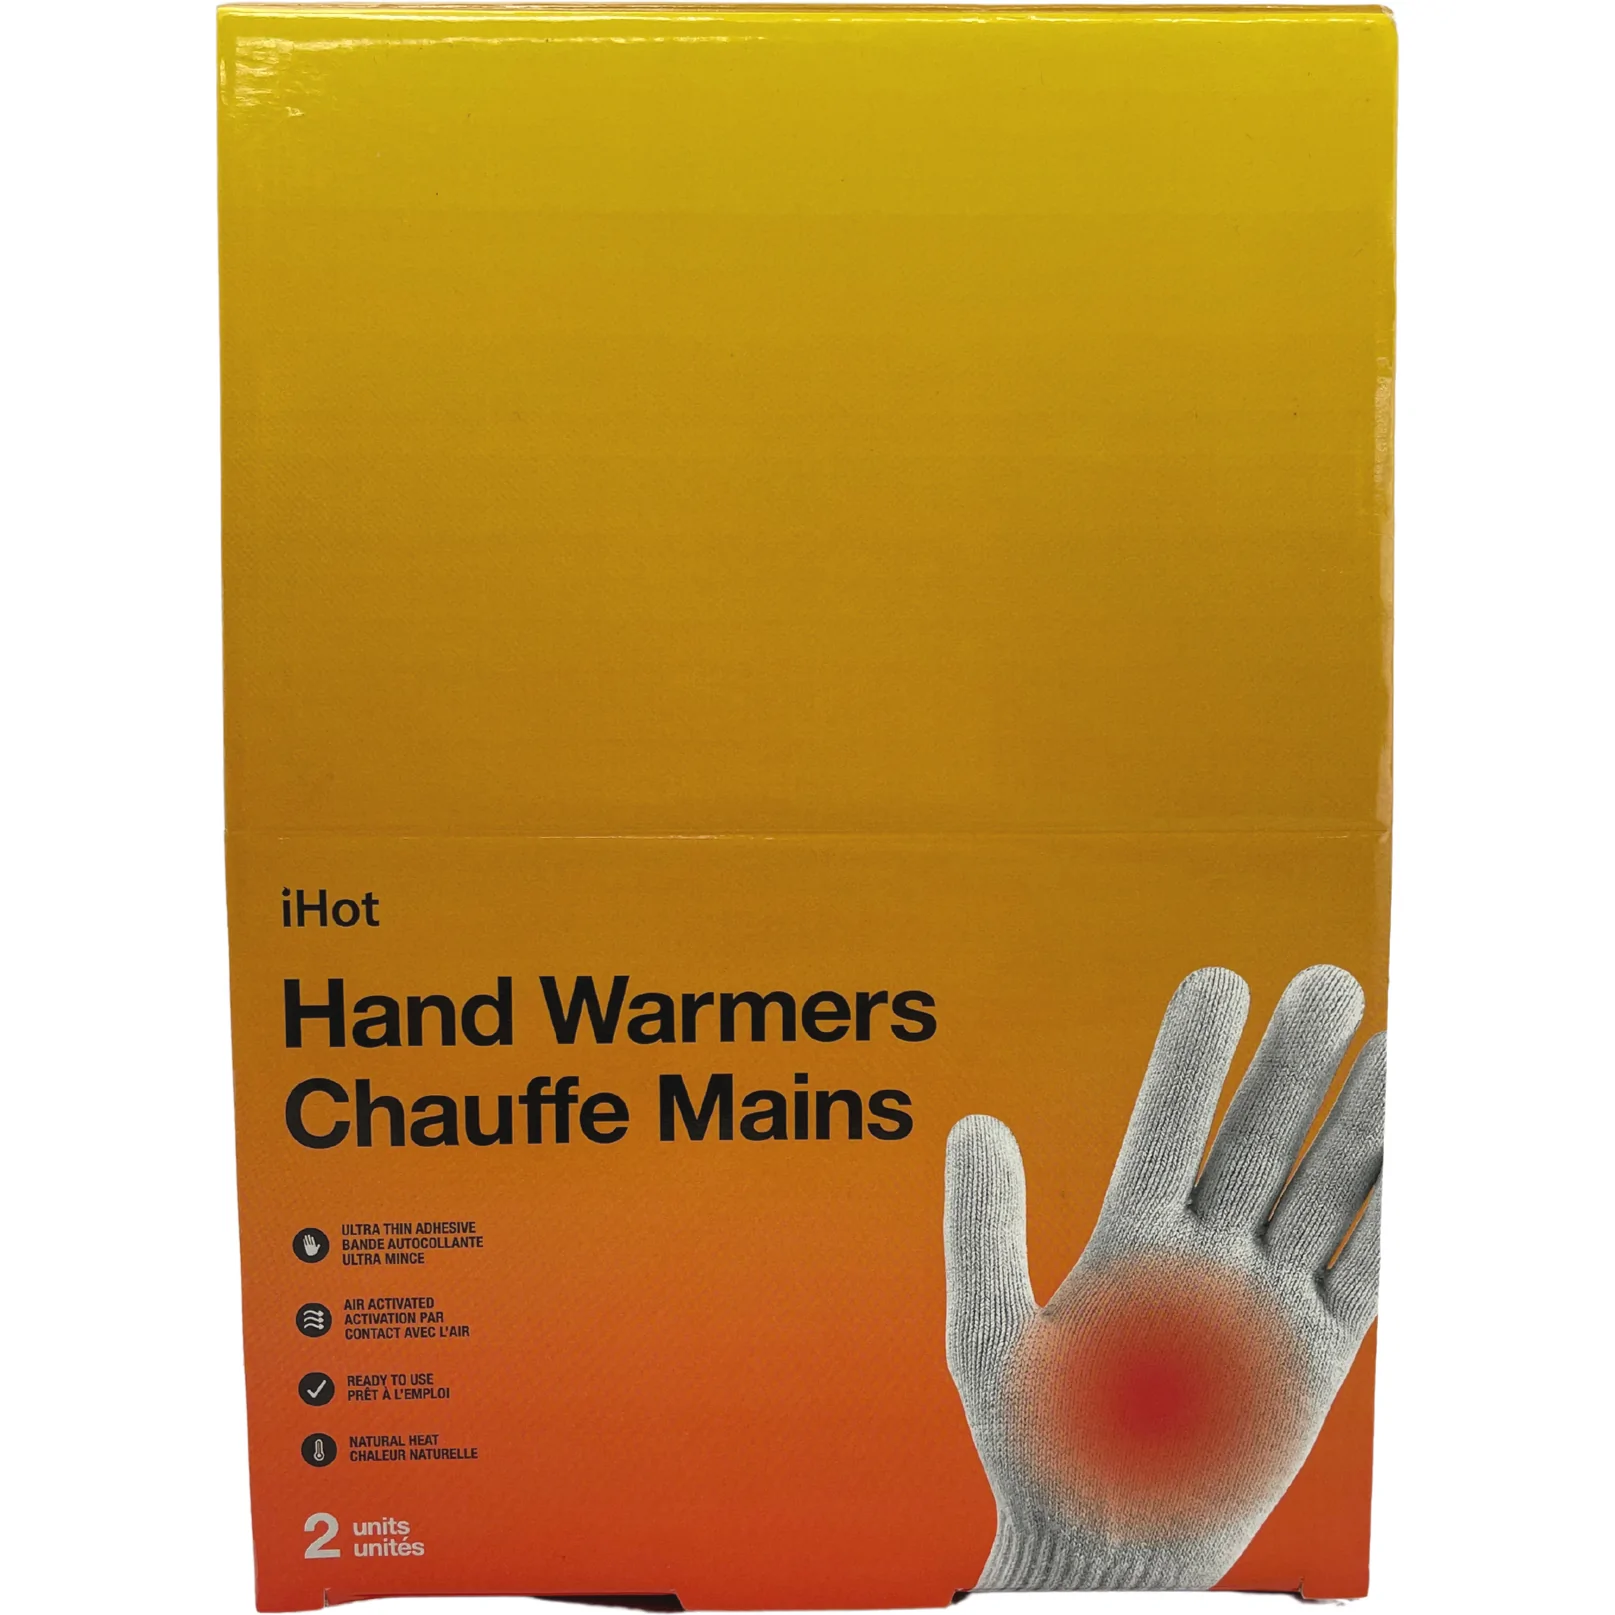 iHot Hand Warmers / 40 Packs / Ready to Use Hand Warmers / Up to 12 Hours of Warmth / Outdoor Winter Gear